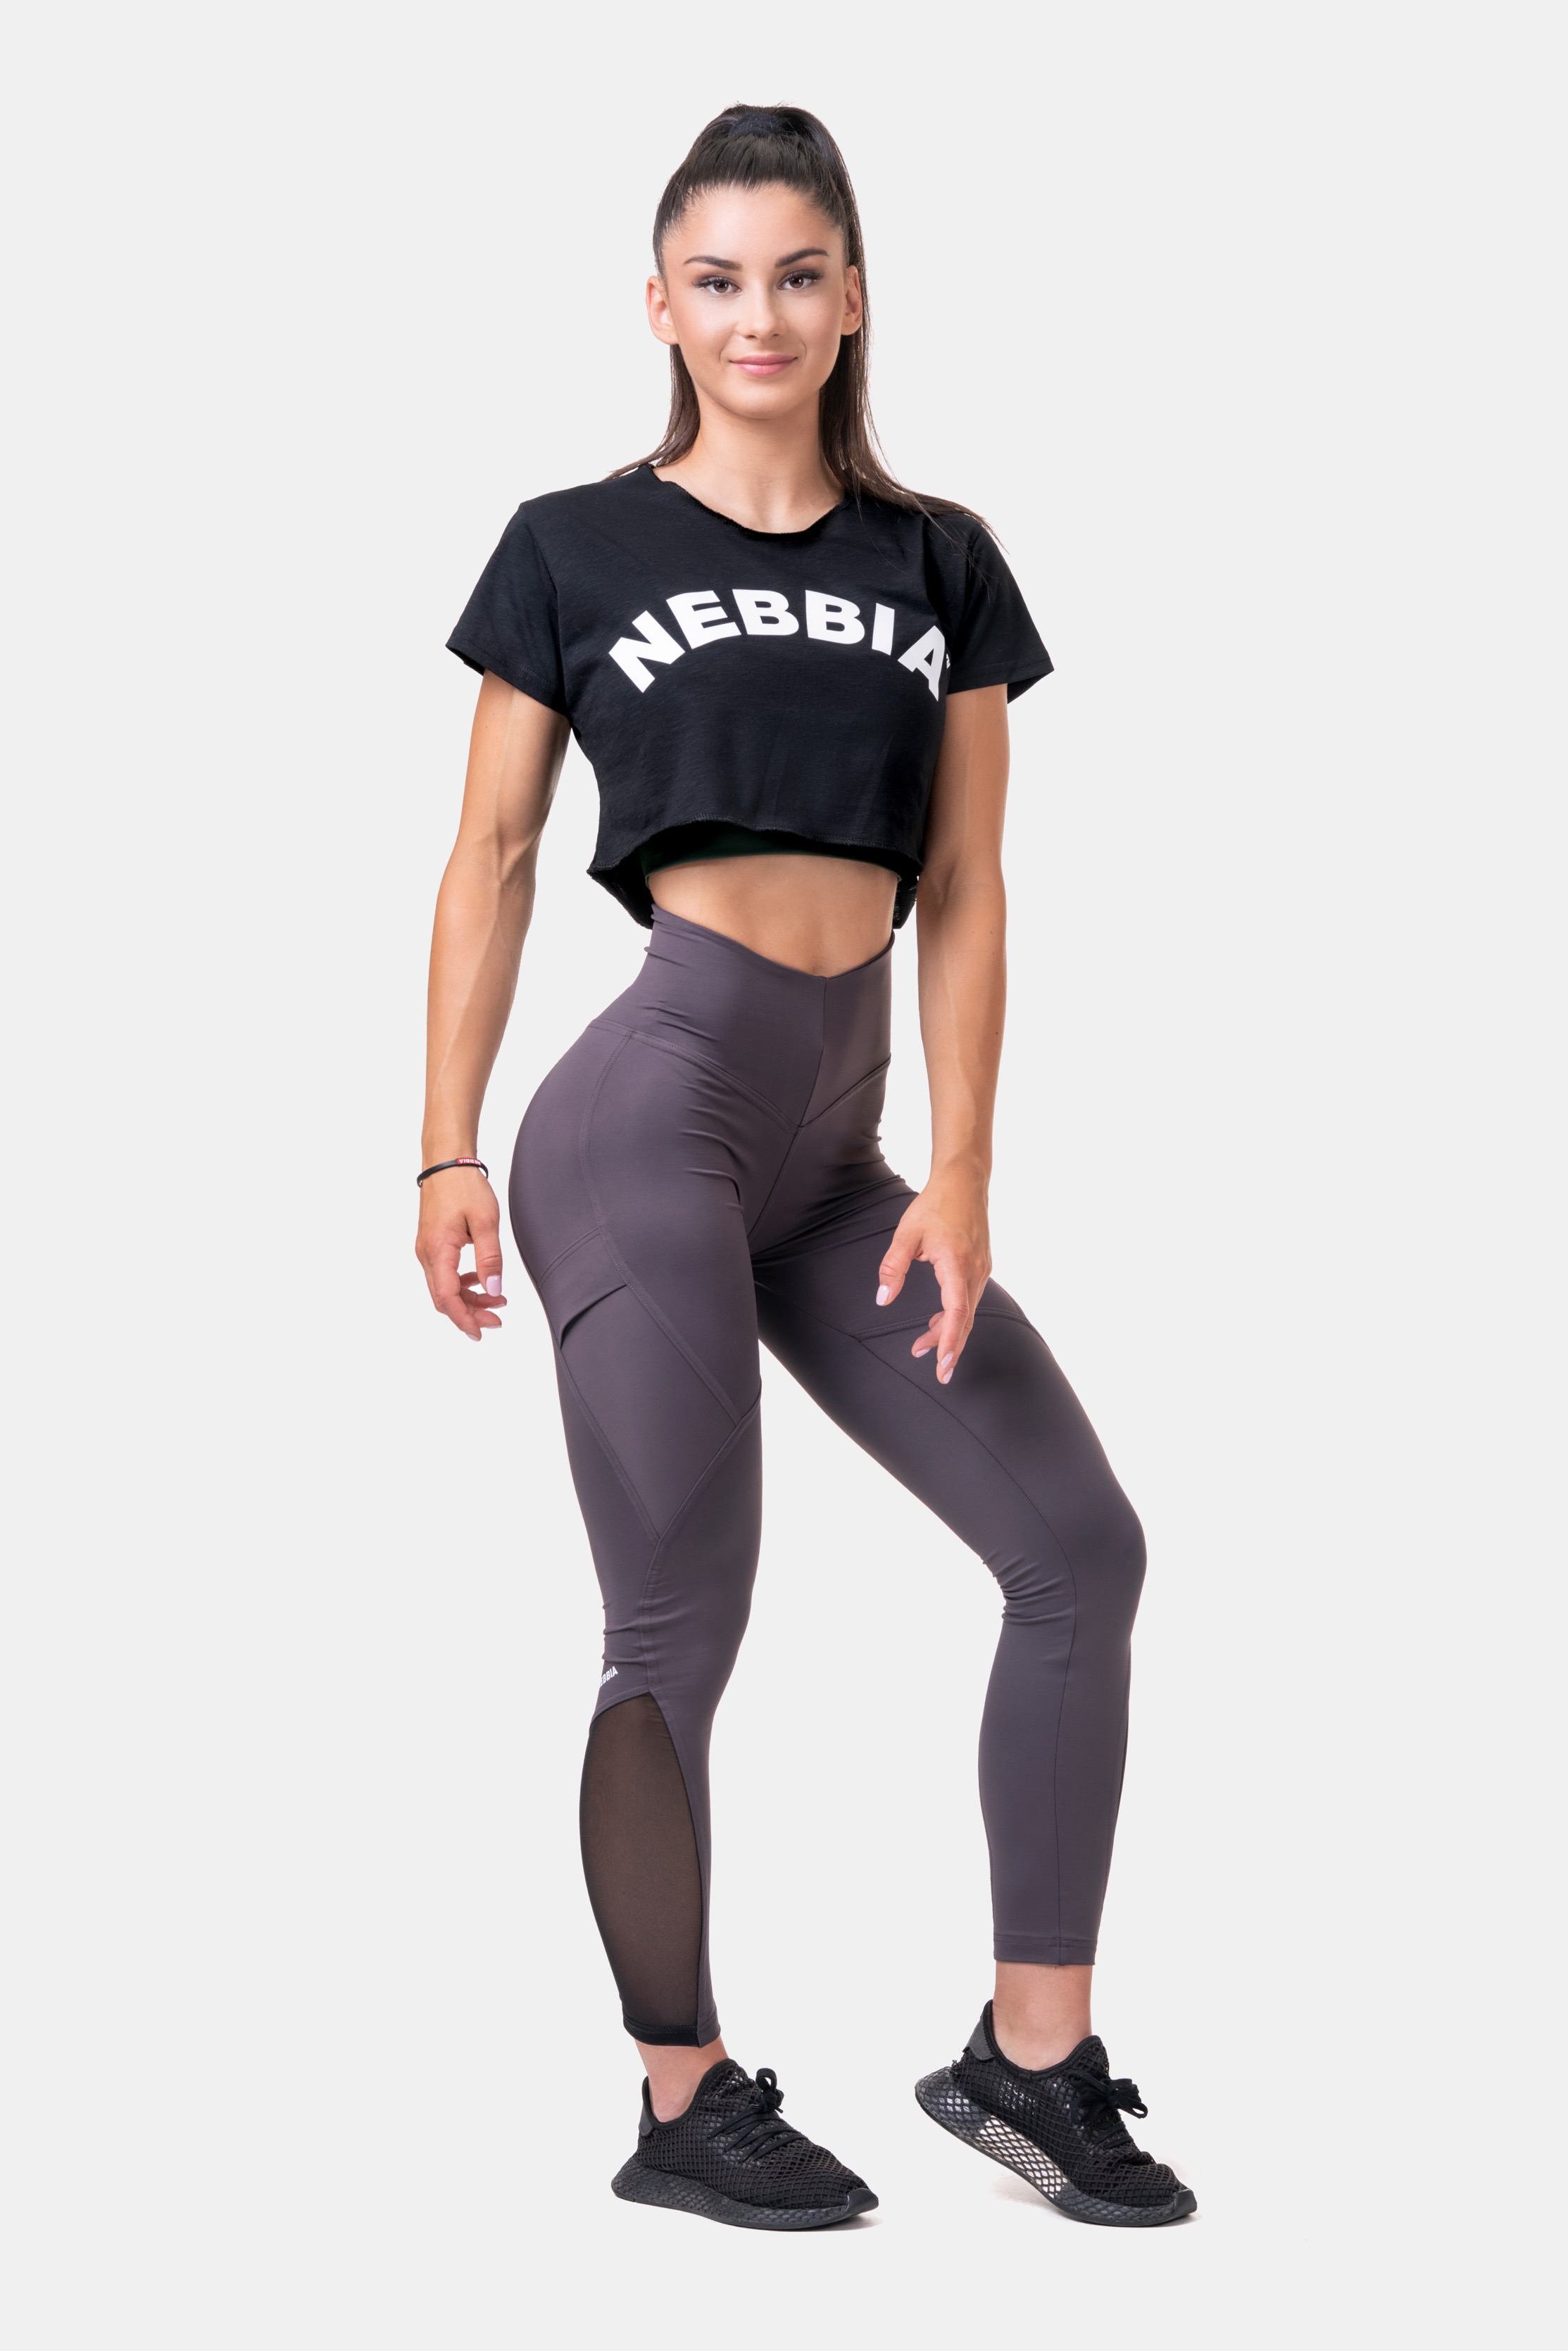 nebbia-magas-dereku-fitness-leggings-fit-and-smart-572-marron